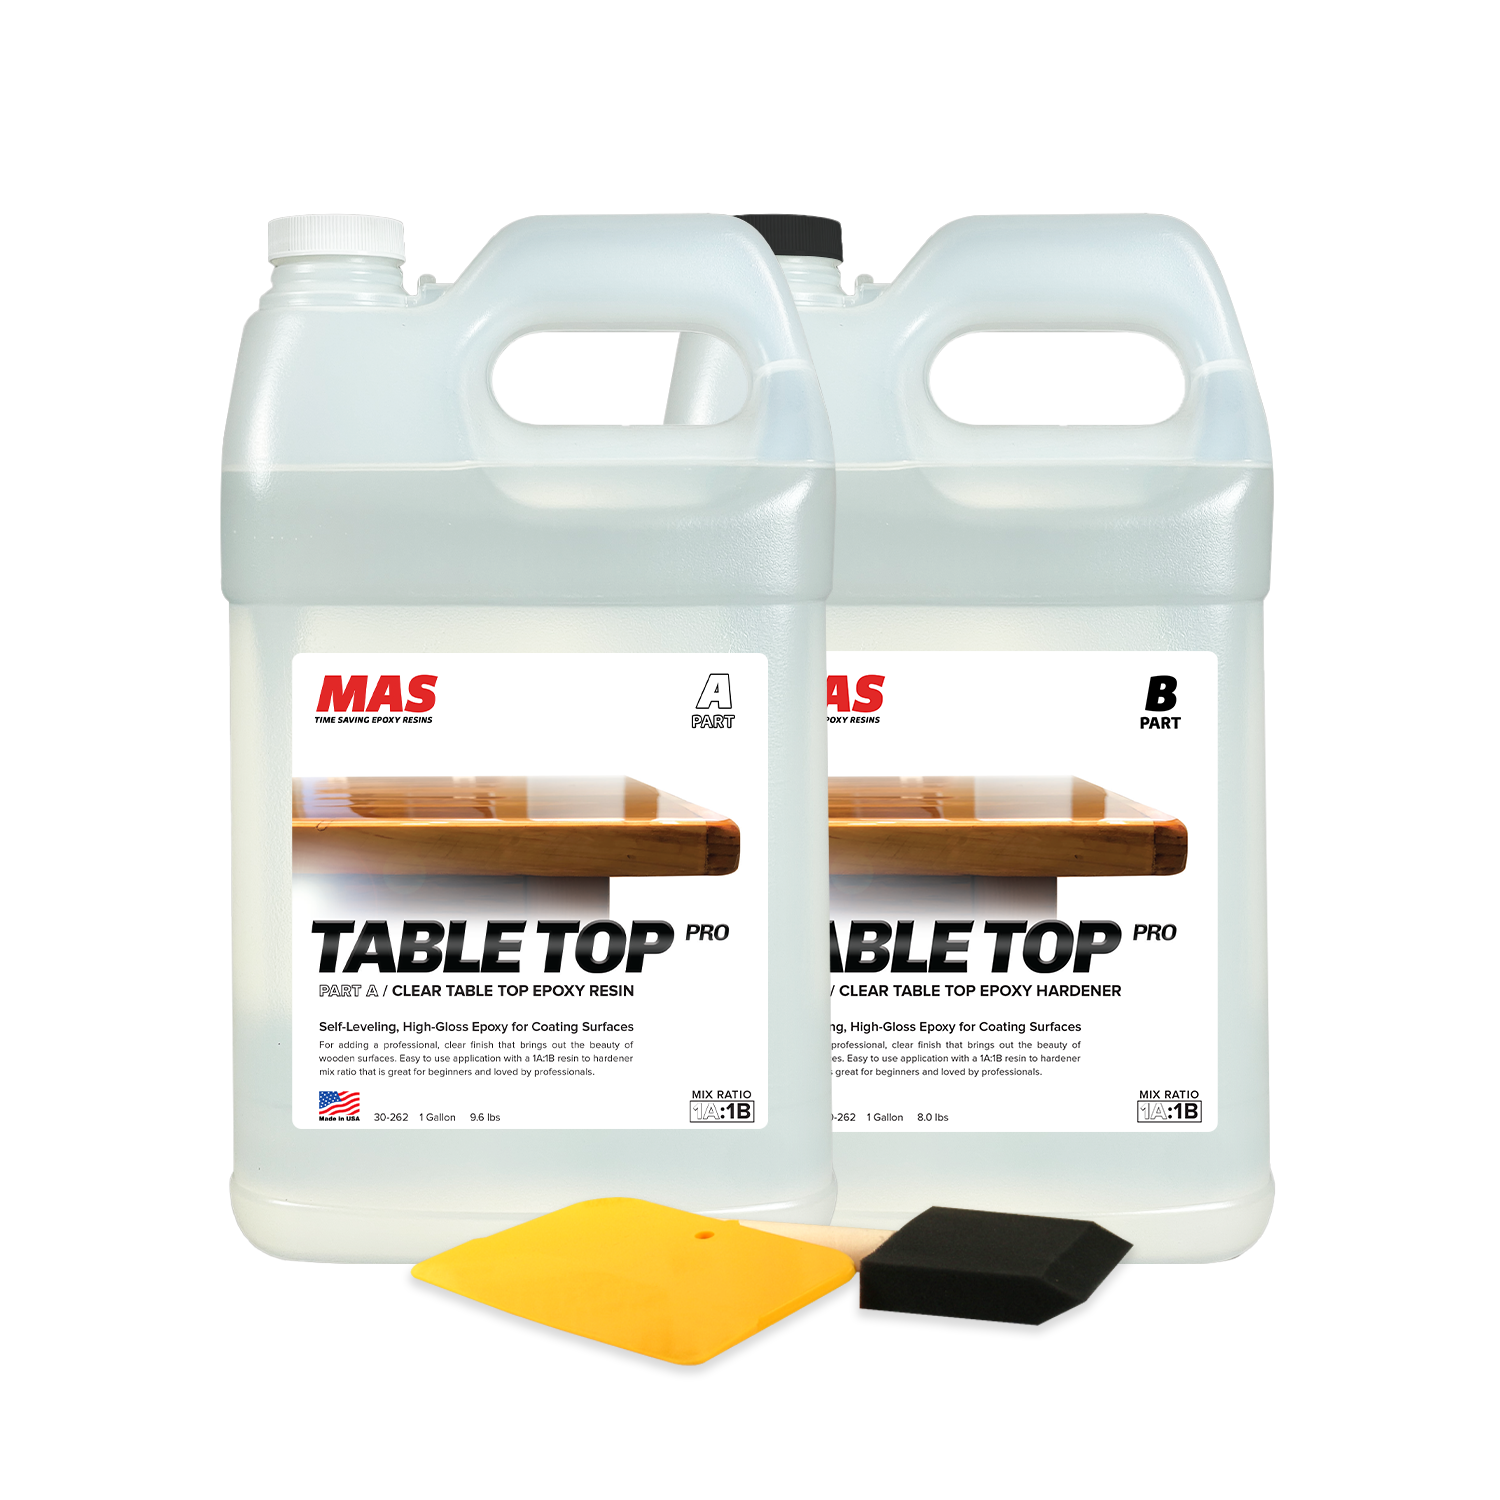 Hello, will a 1/4" pour of table top pro be able to support the weight of 100lb slab bar top on 4 supports?